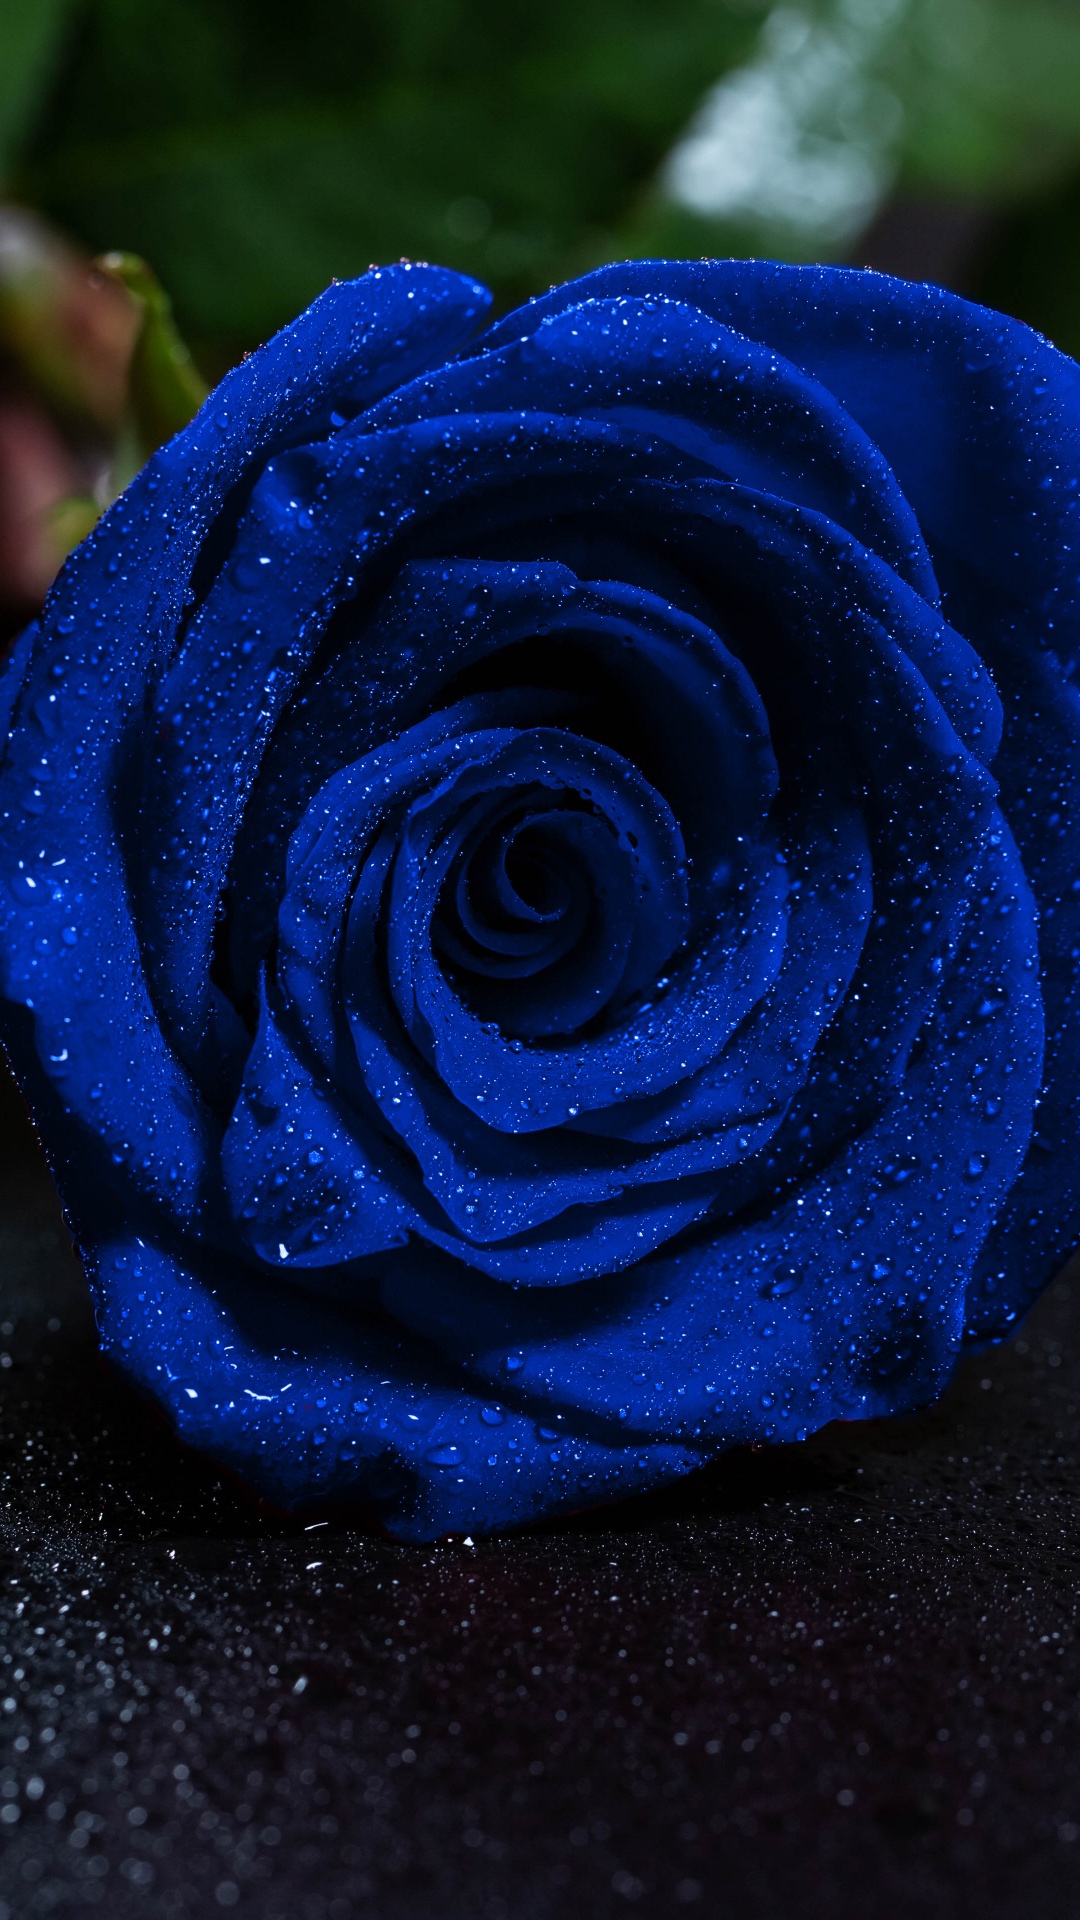 Blue Rose on Black Surface. Wallpaper in 1080x1920 Resolution